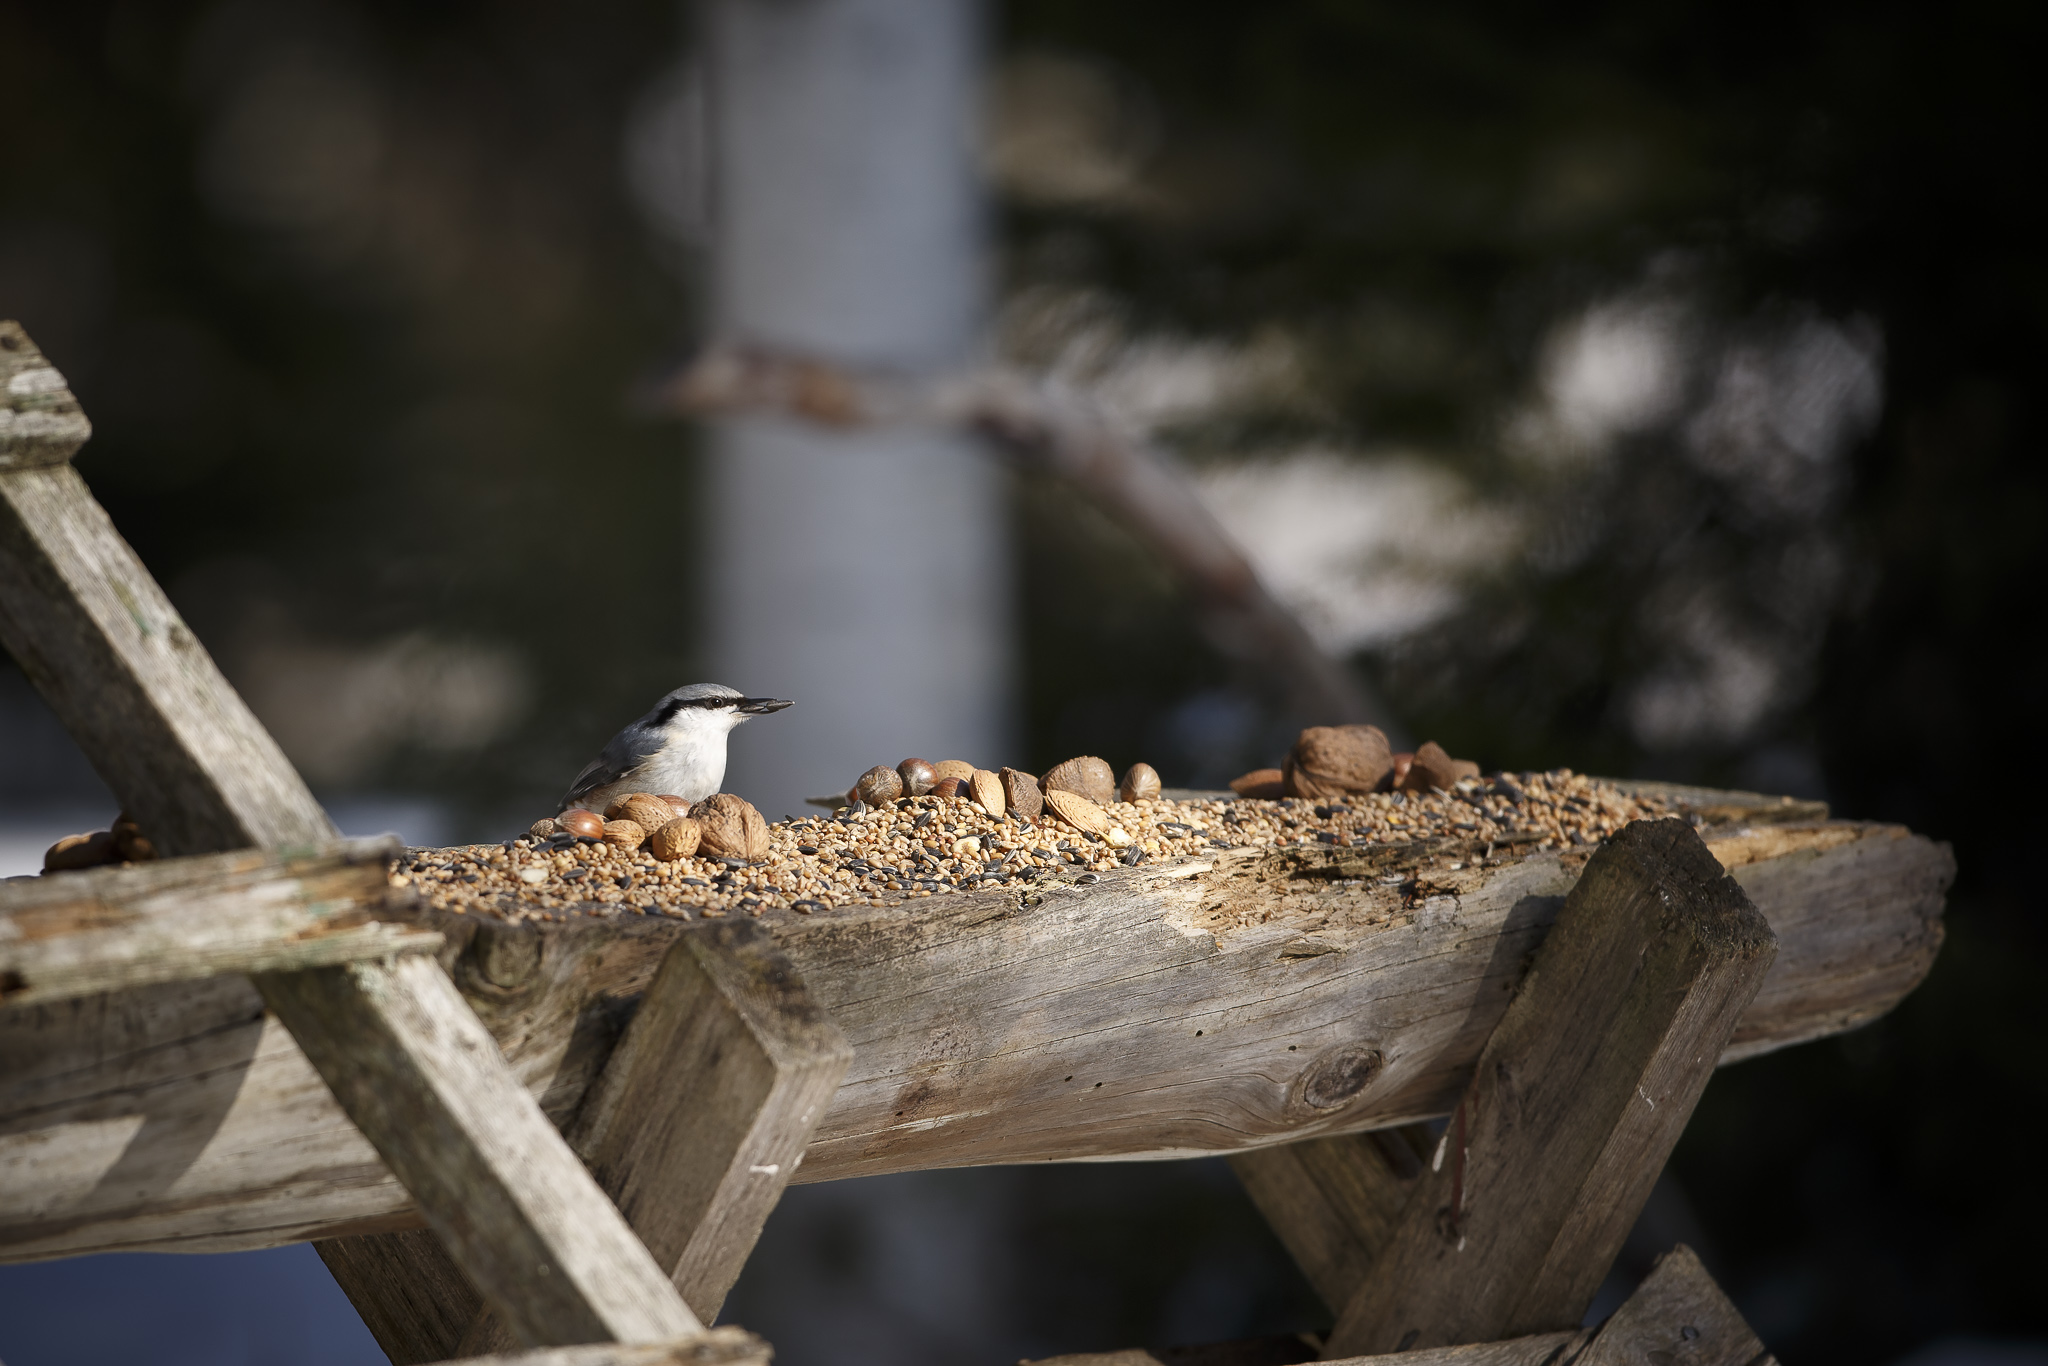 Canon 1dx, 300 f/2.8 is II @f/2.8. ISO 100. Nuthatch